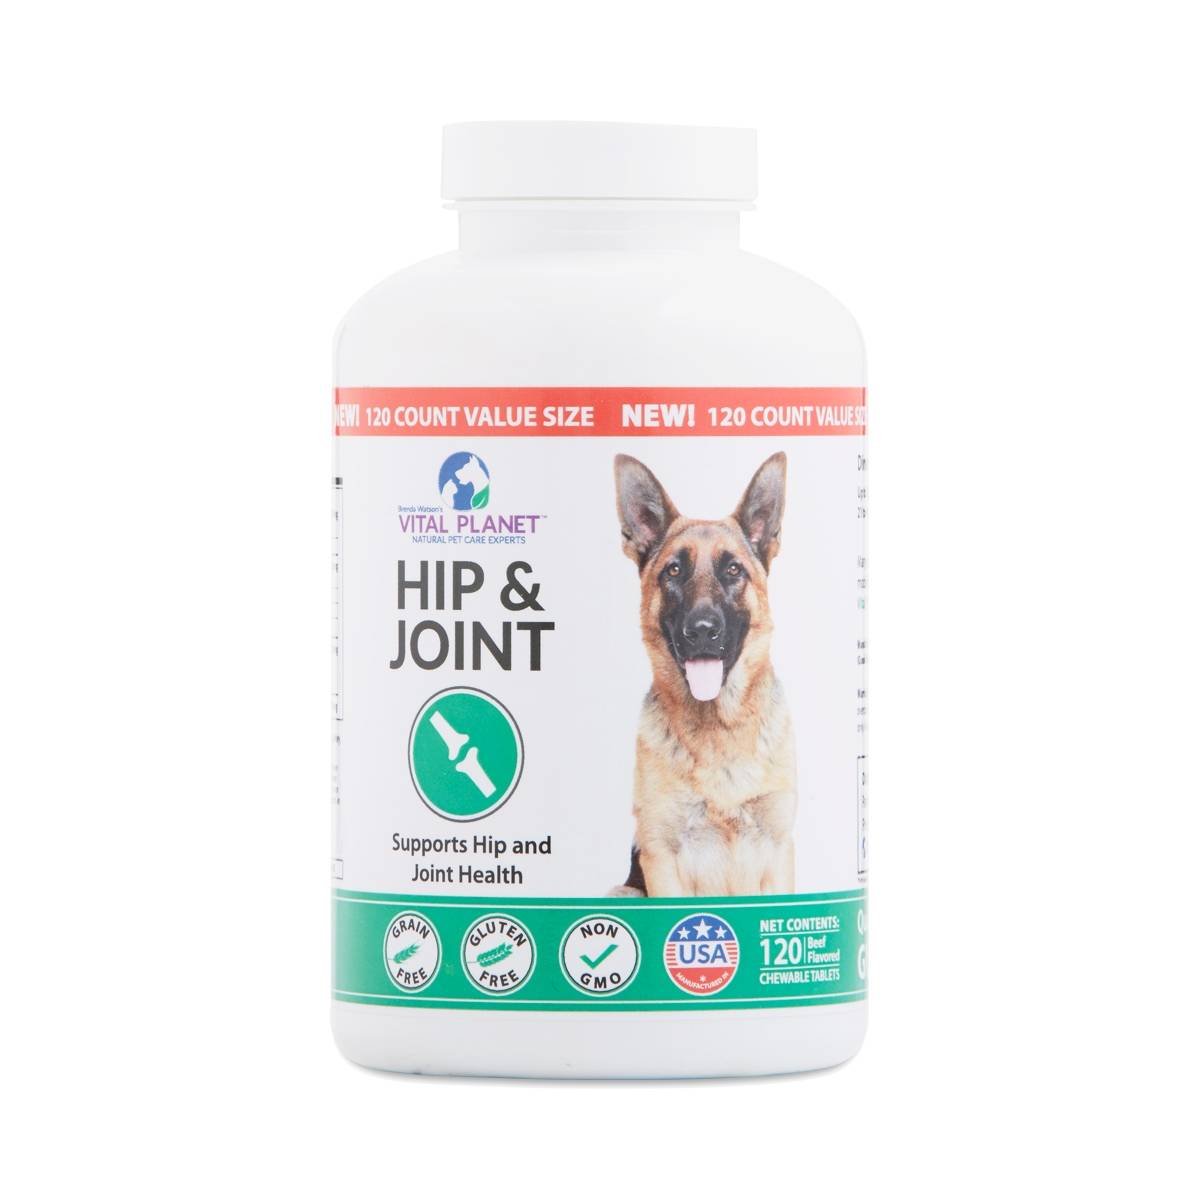 Hip & Joint Support For Dogs, Beef